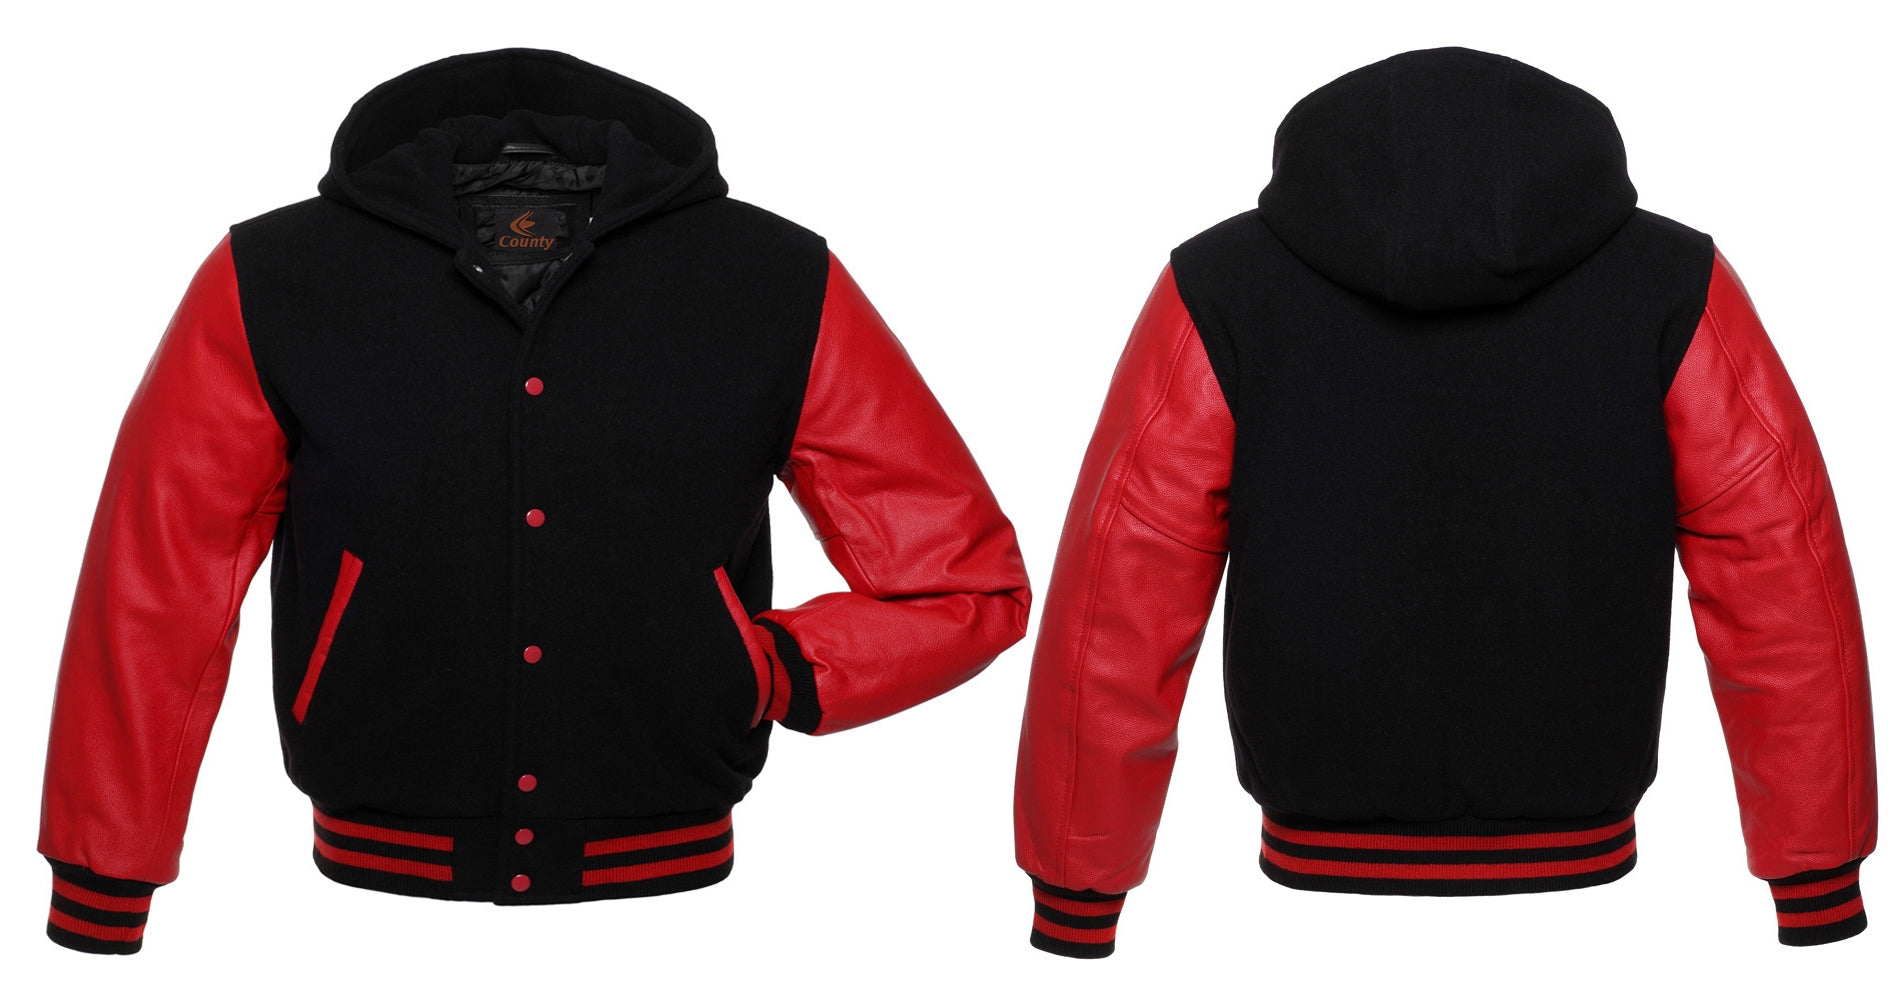 Bomber Varsity Jacket: Black body, red leather sleeves. Perfect blend of sporty and stylish design.